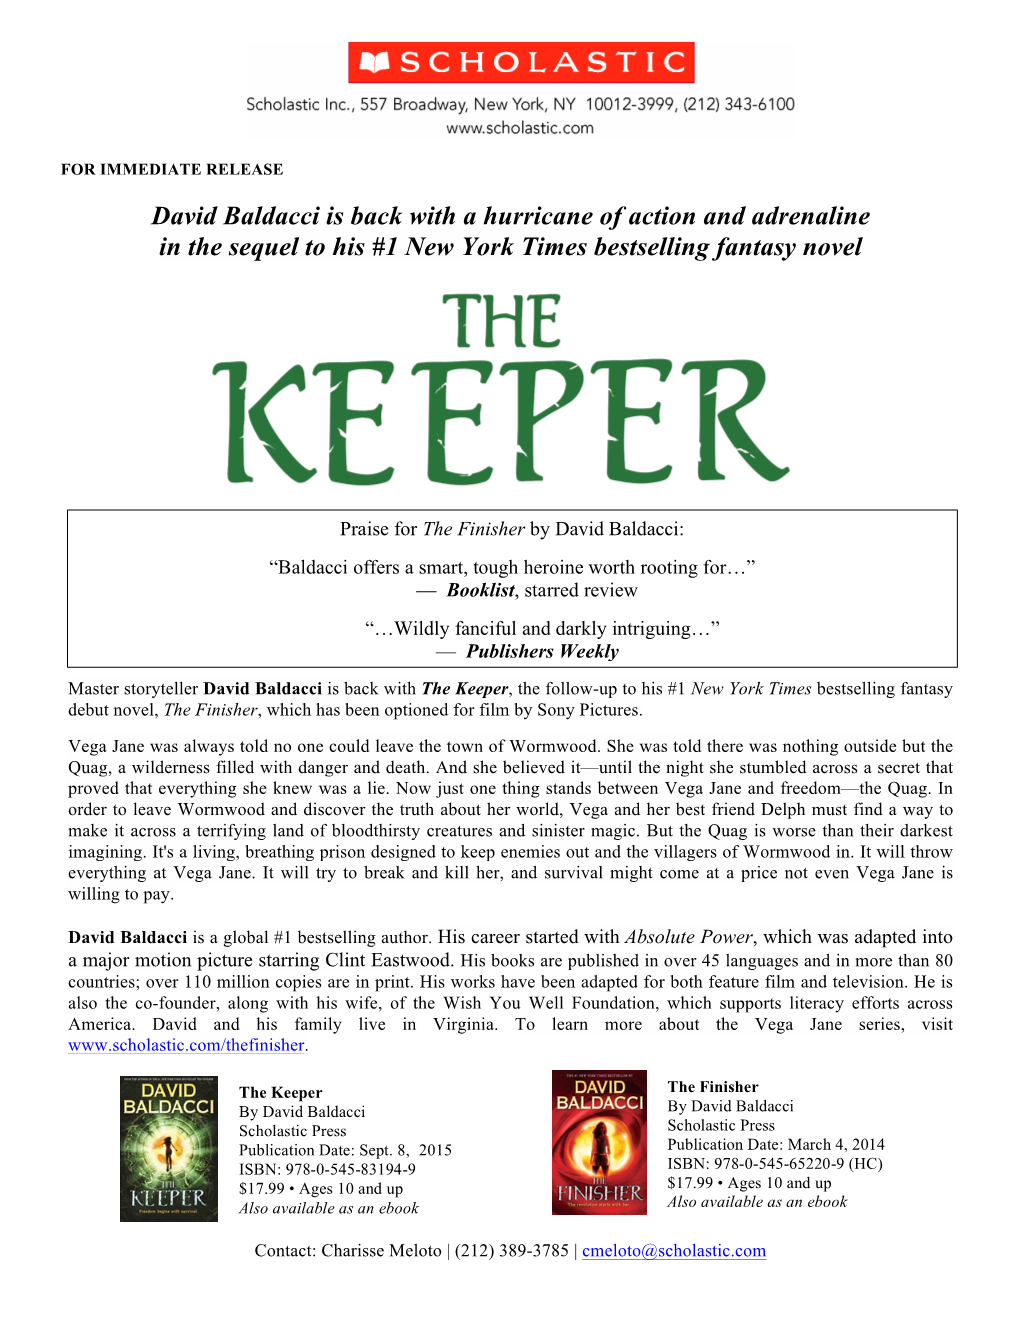 The Keeper Press Release